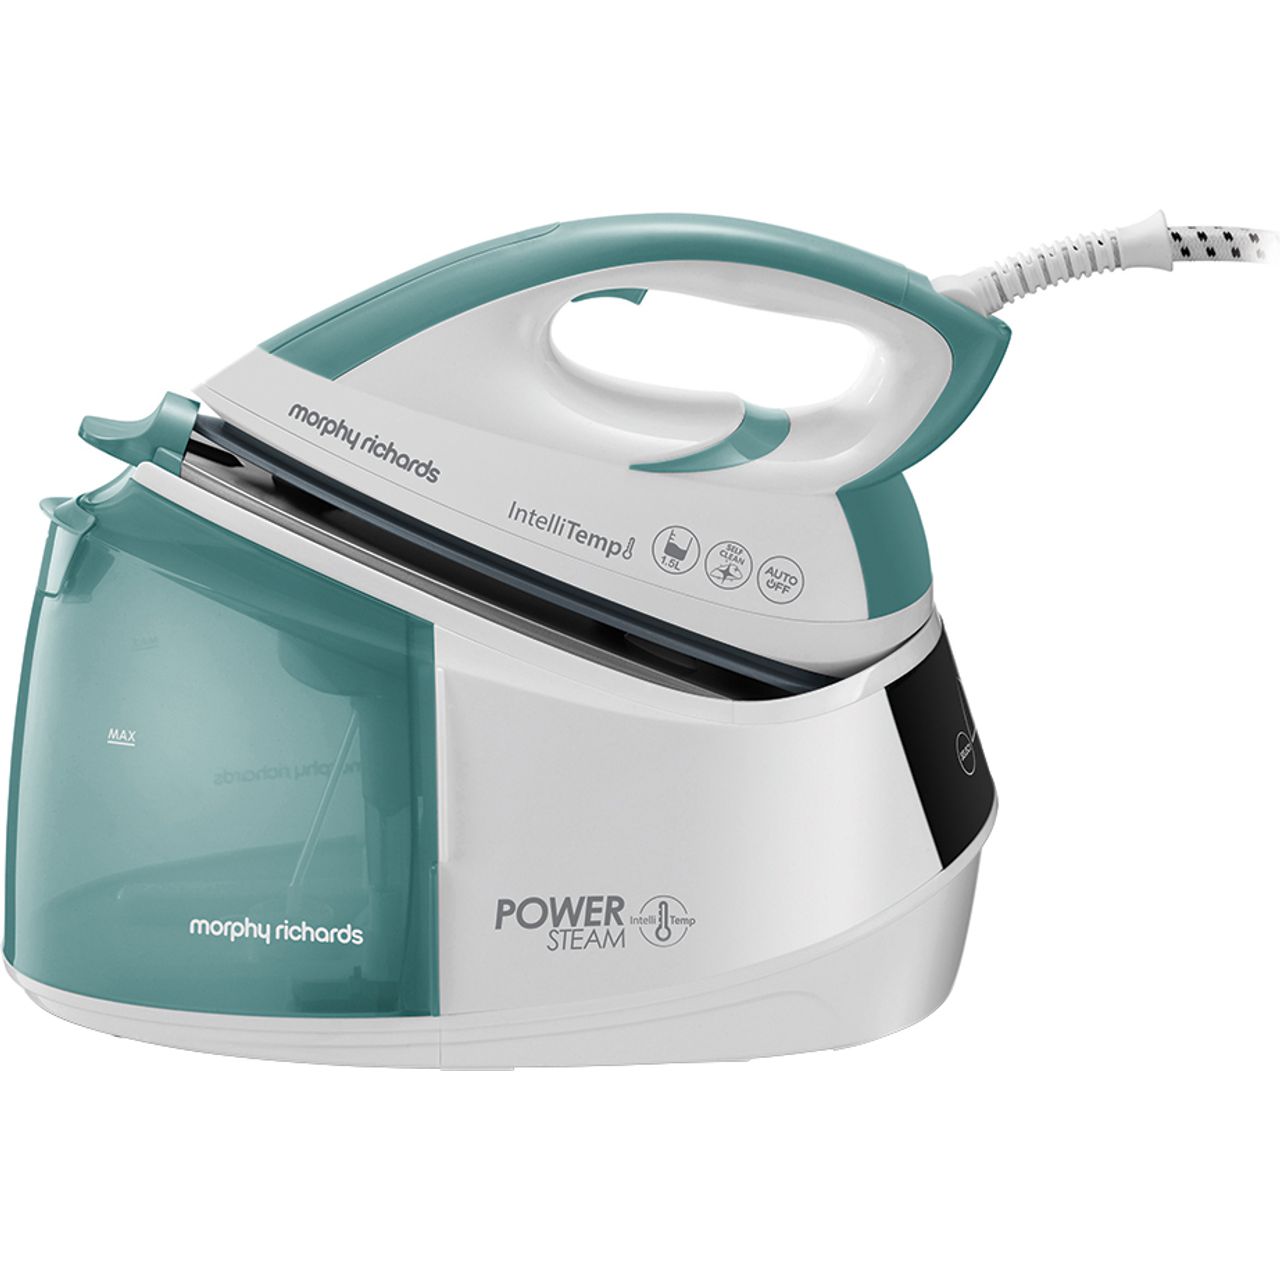 Recollection One sentence Circumference 333300_GRW | Morphy Richards Steam Generator Iron | ao.com